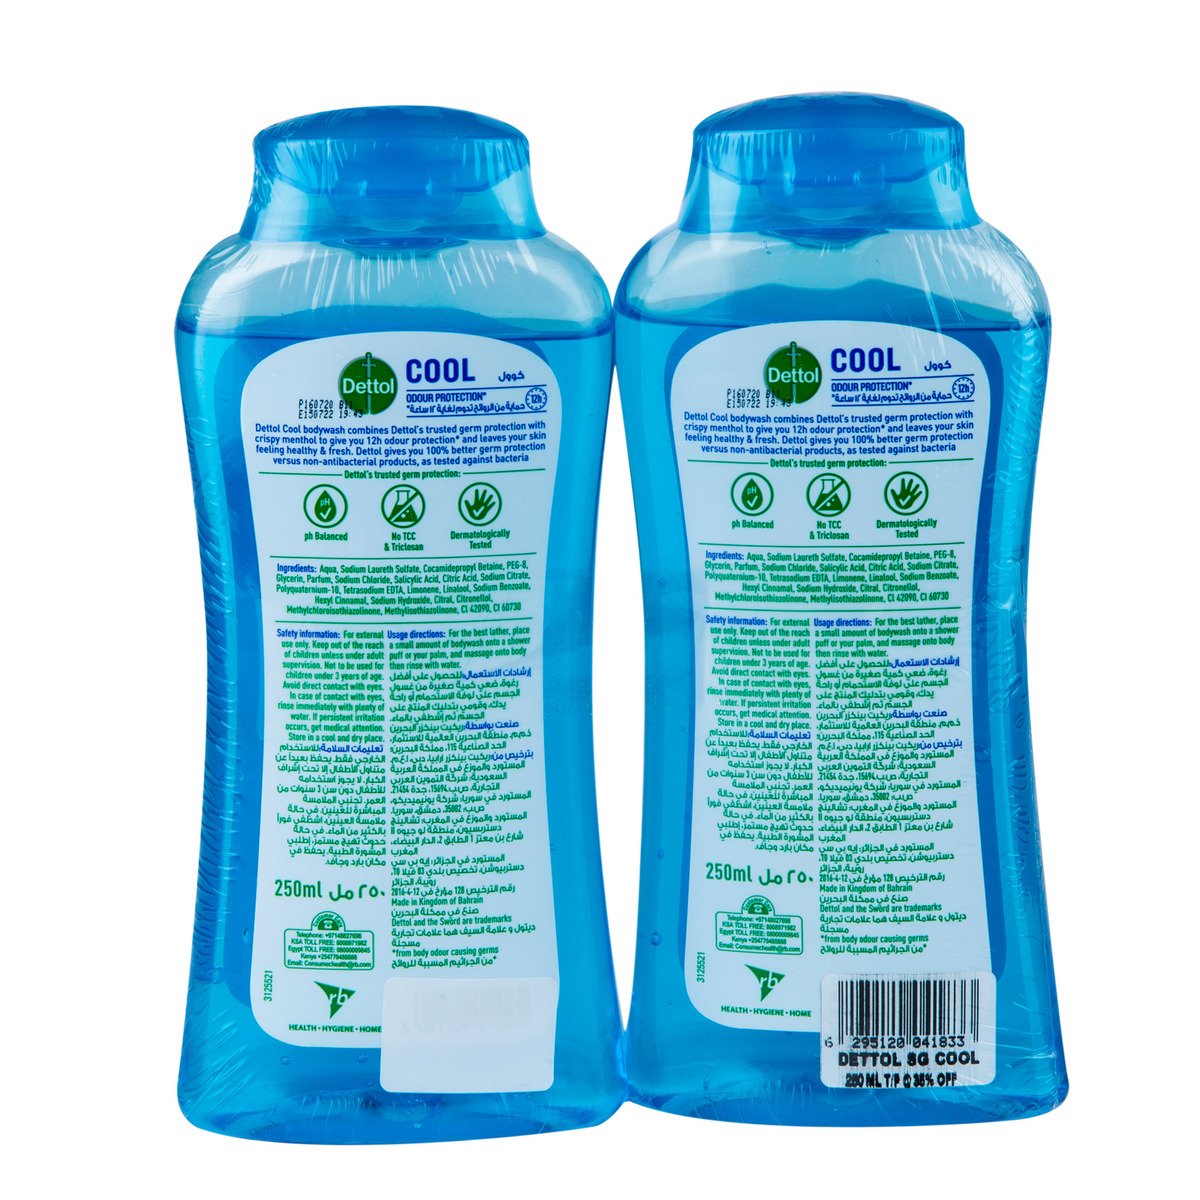 Dettol Cool Body Wash Menthol and eucalyptus Fragrance 2 x 250 ml